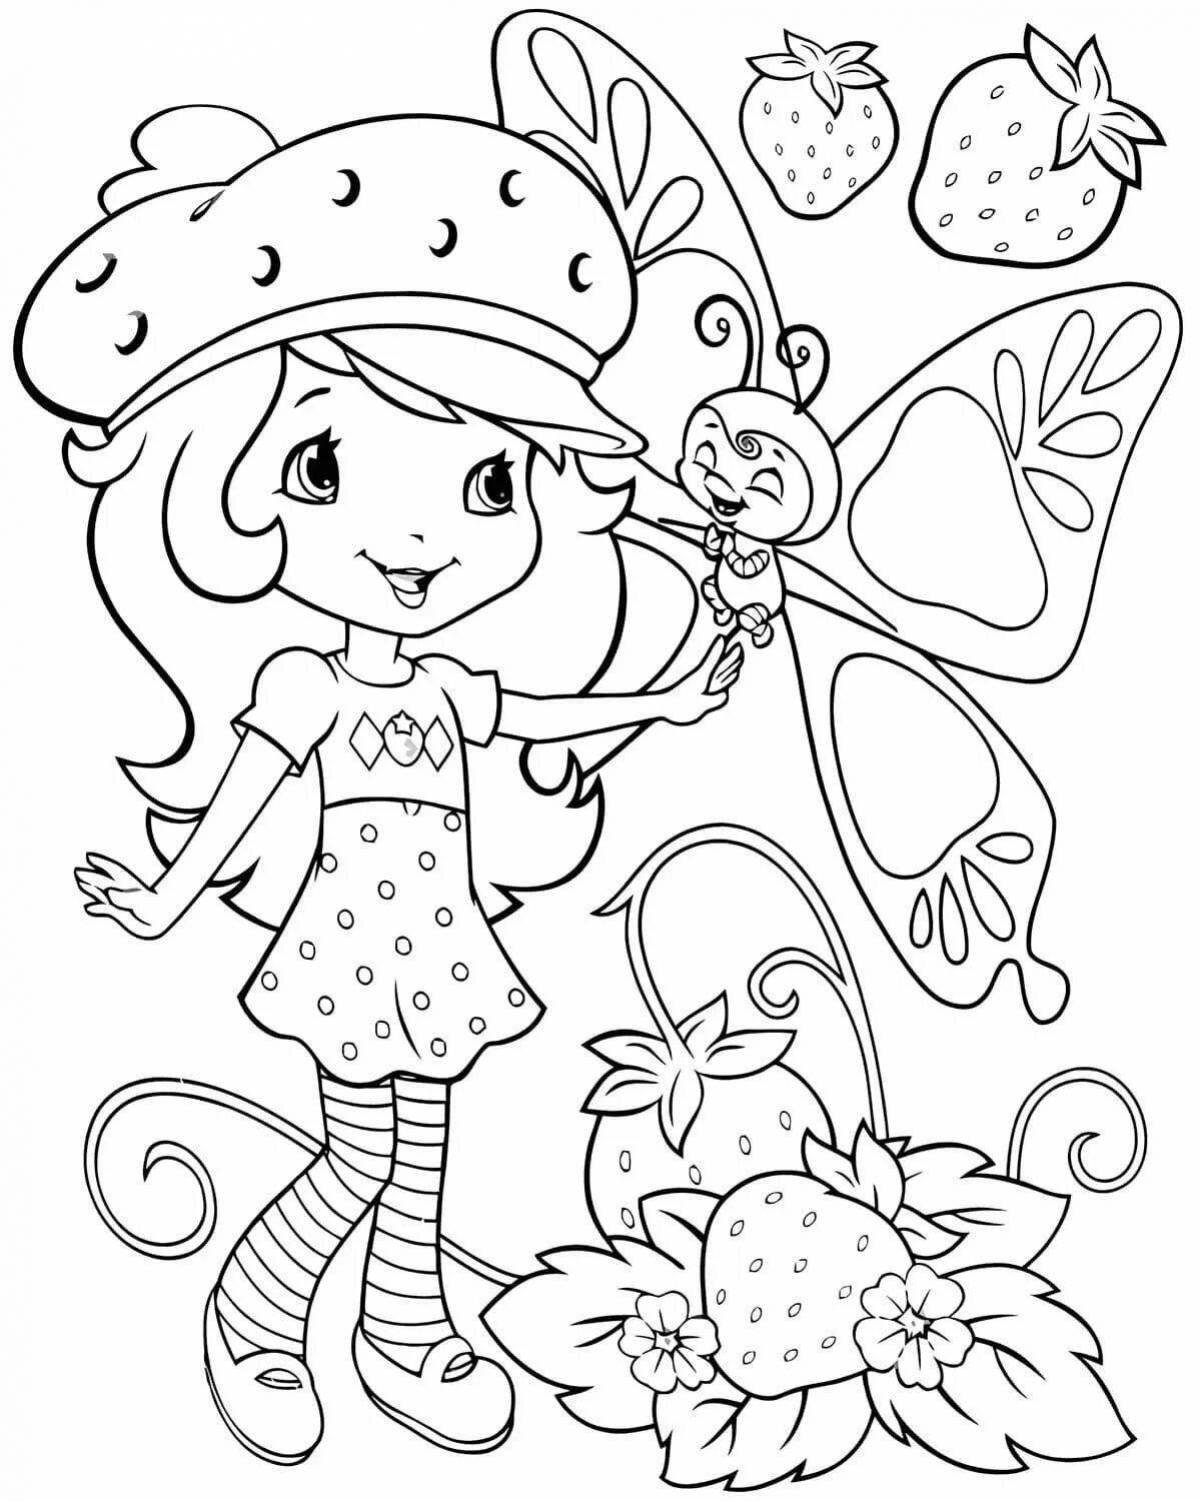 Sparkly strawberry coloring book for girls